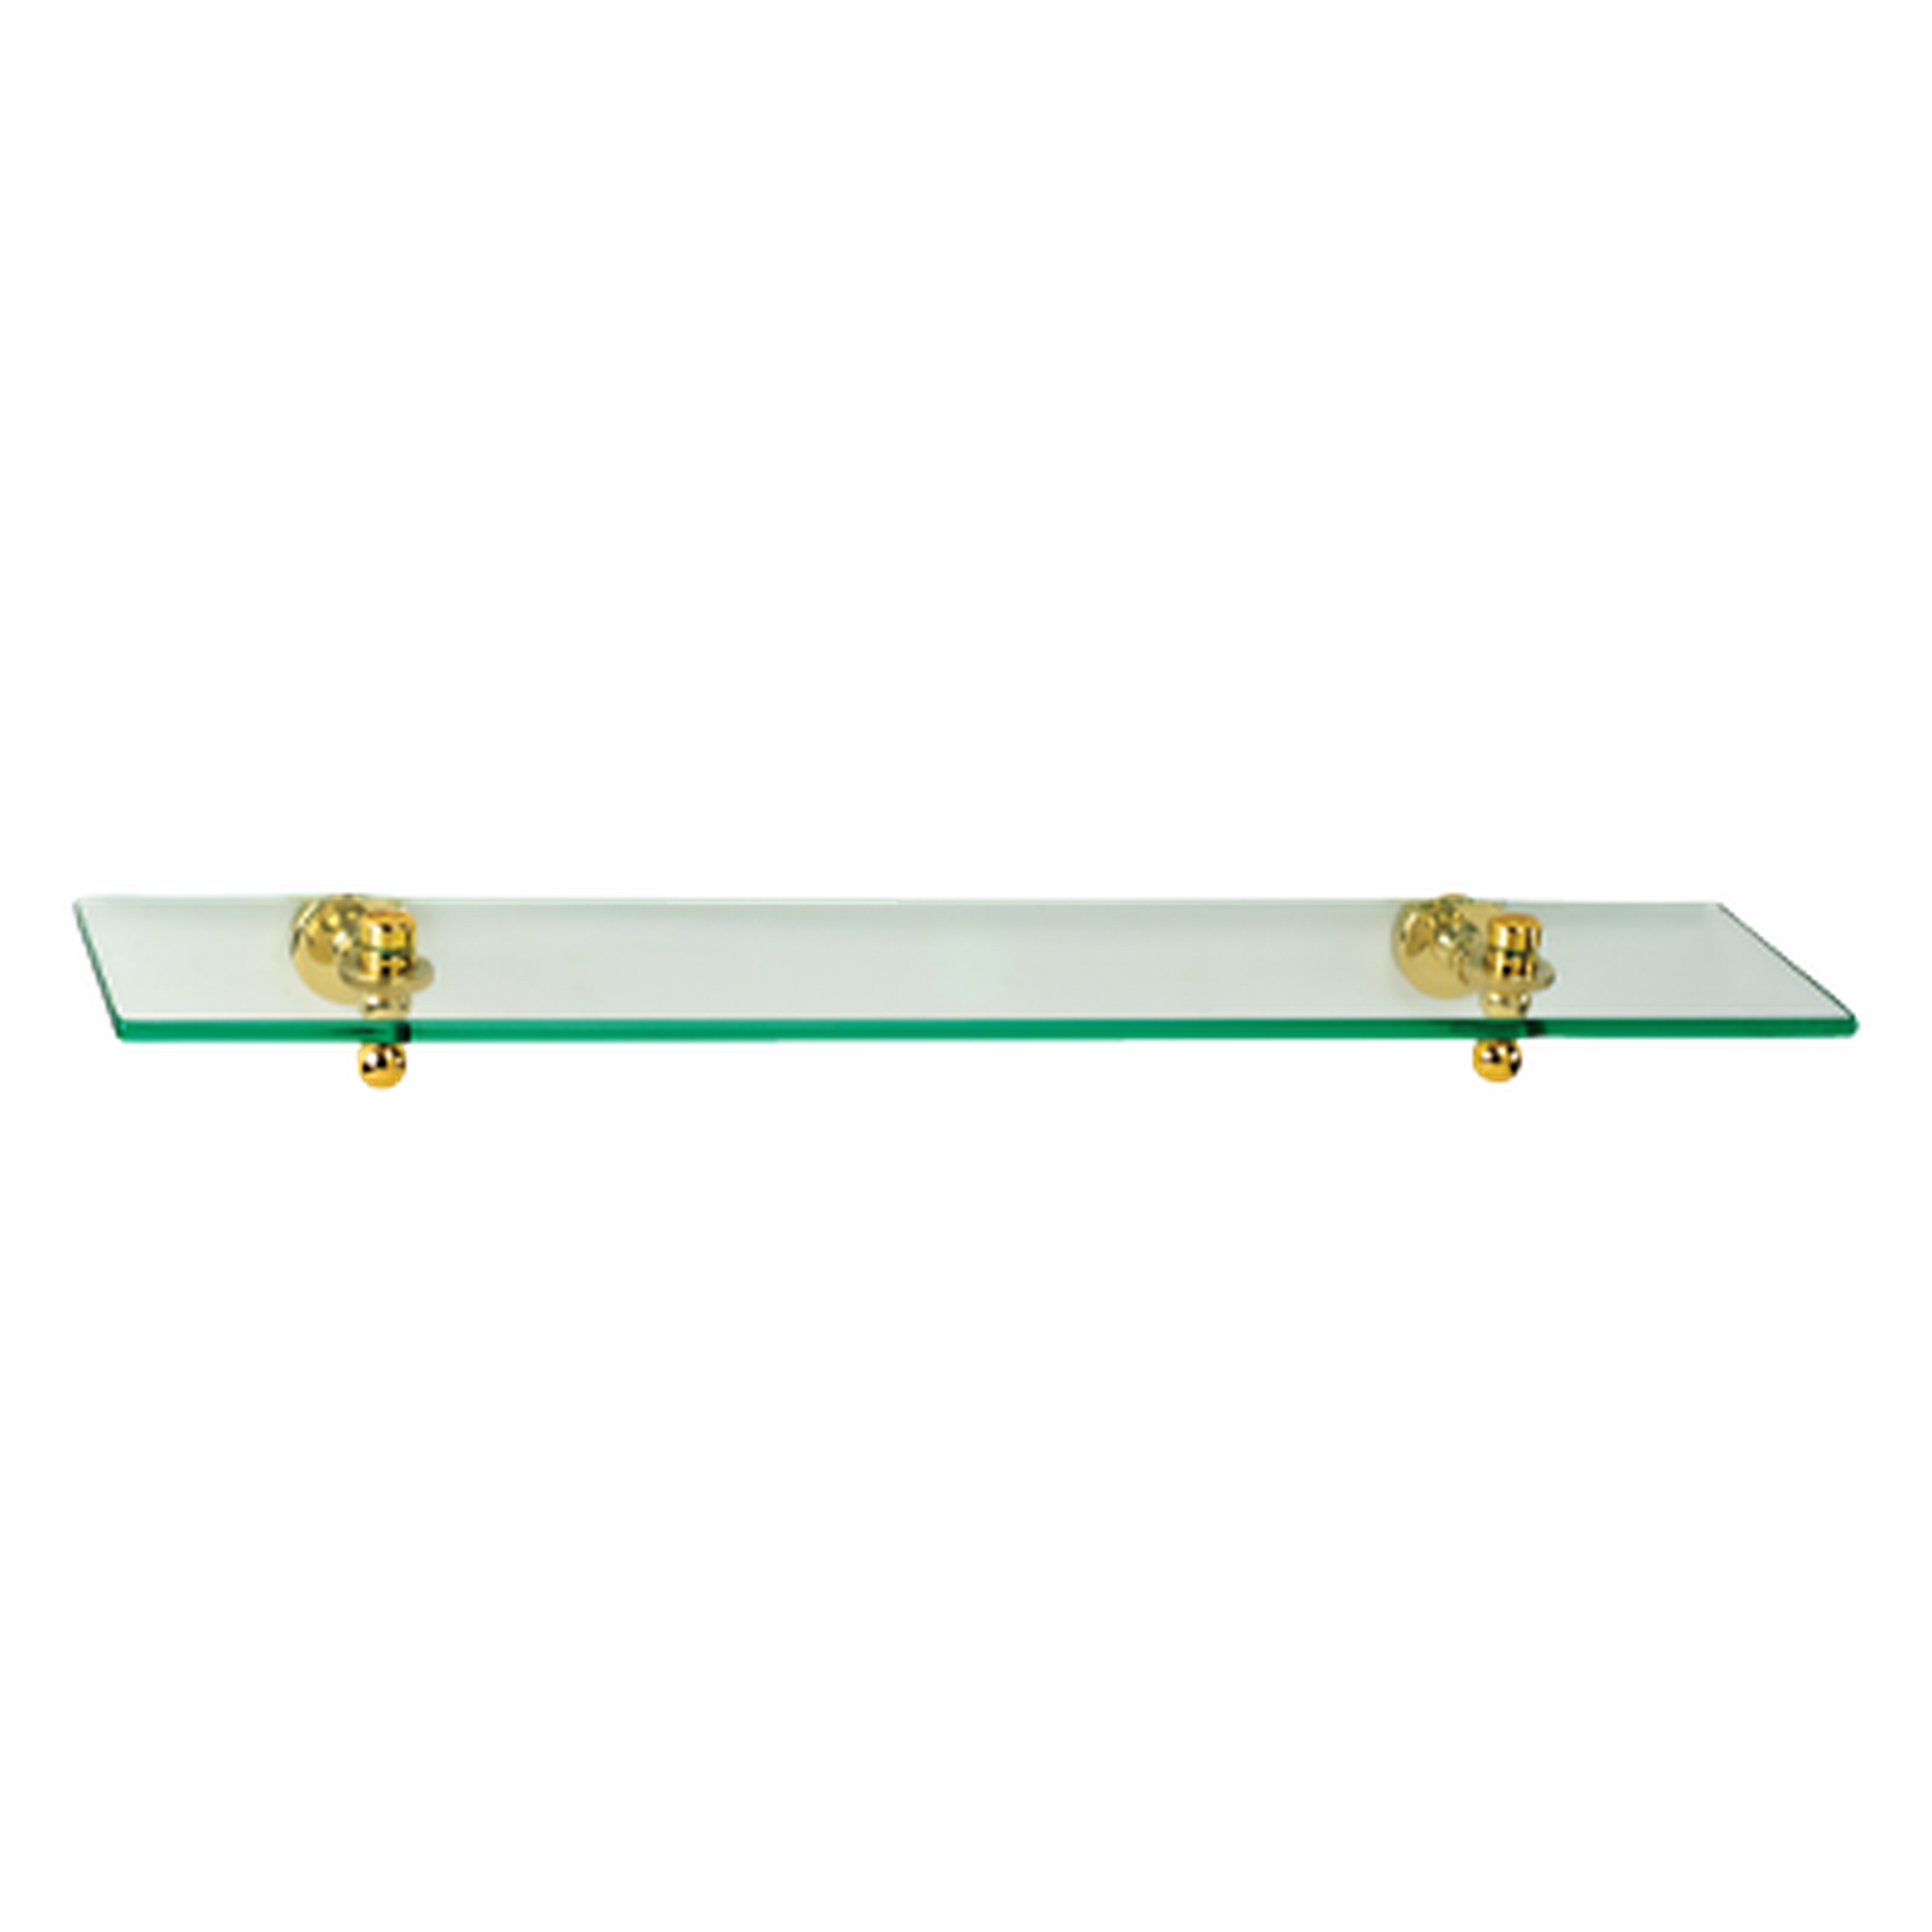 Afina 24" 3/8" Thick Tempered Glass Shelf With Satin Nickel Mounting Bracket and Brass Decorative Gear Style